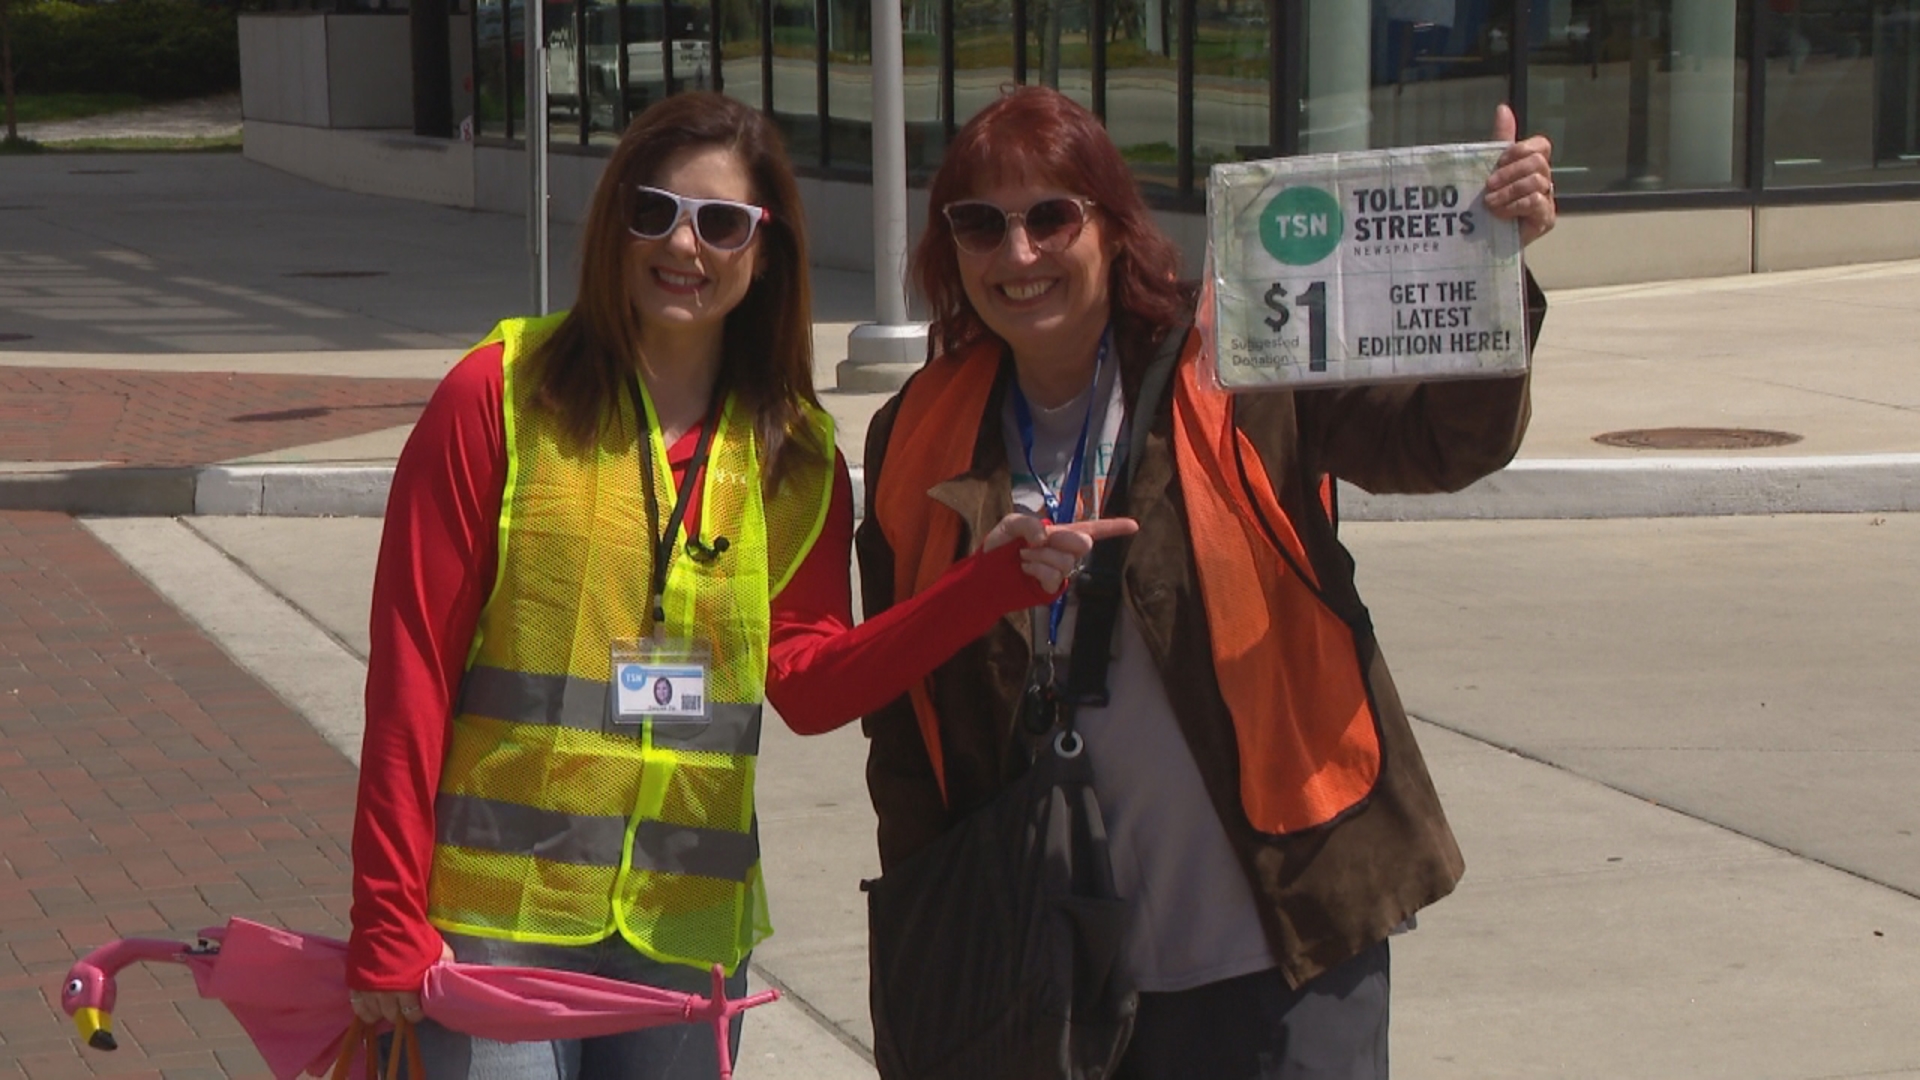 WTOL 11's Amanda Fay participated in the event, alongside Toledo Mayor Wade Kapszukiewicz. Toledo Streets Newspaper provides no-barrier access to employment.